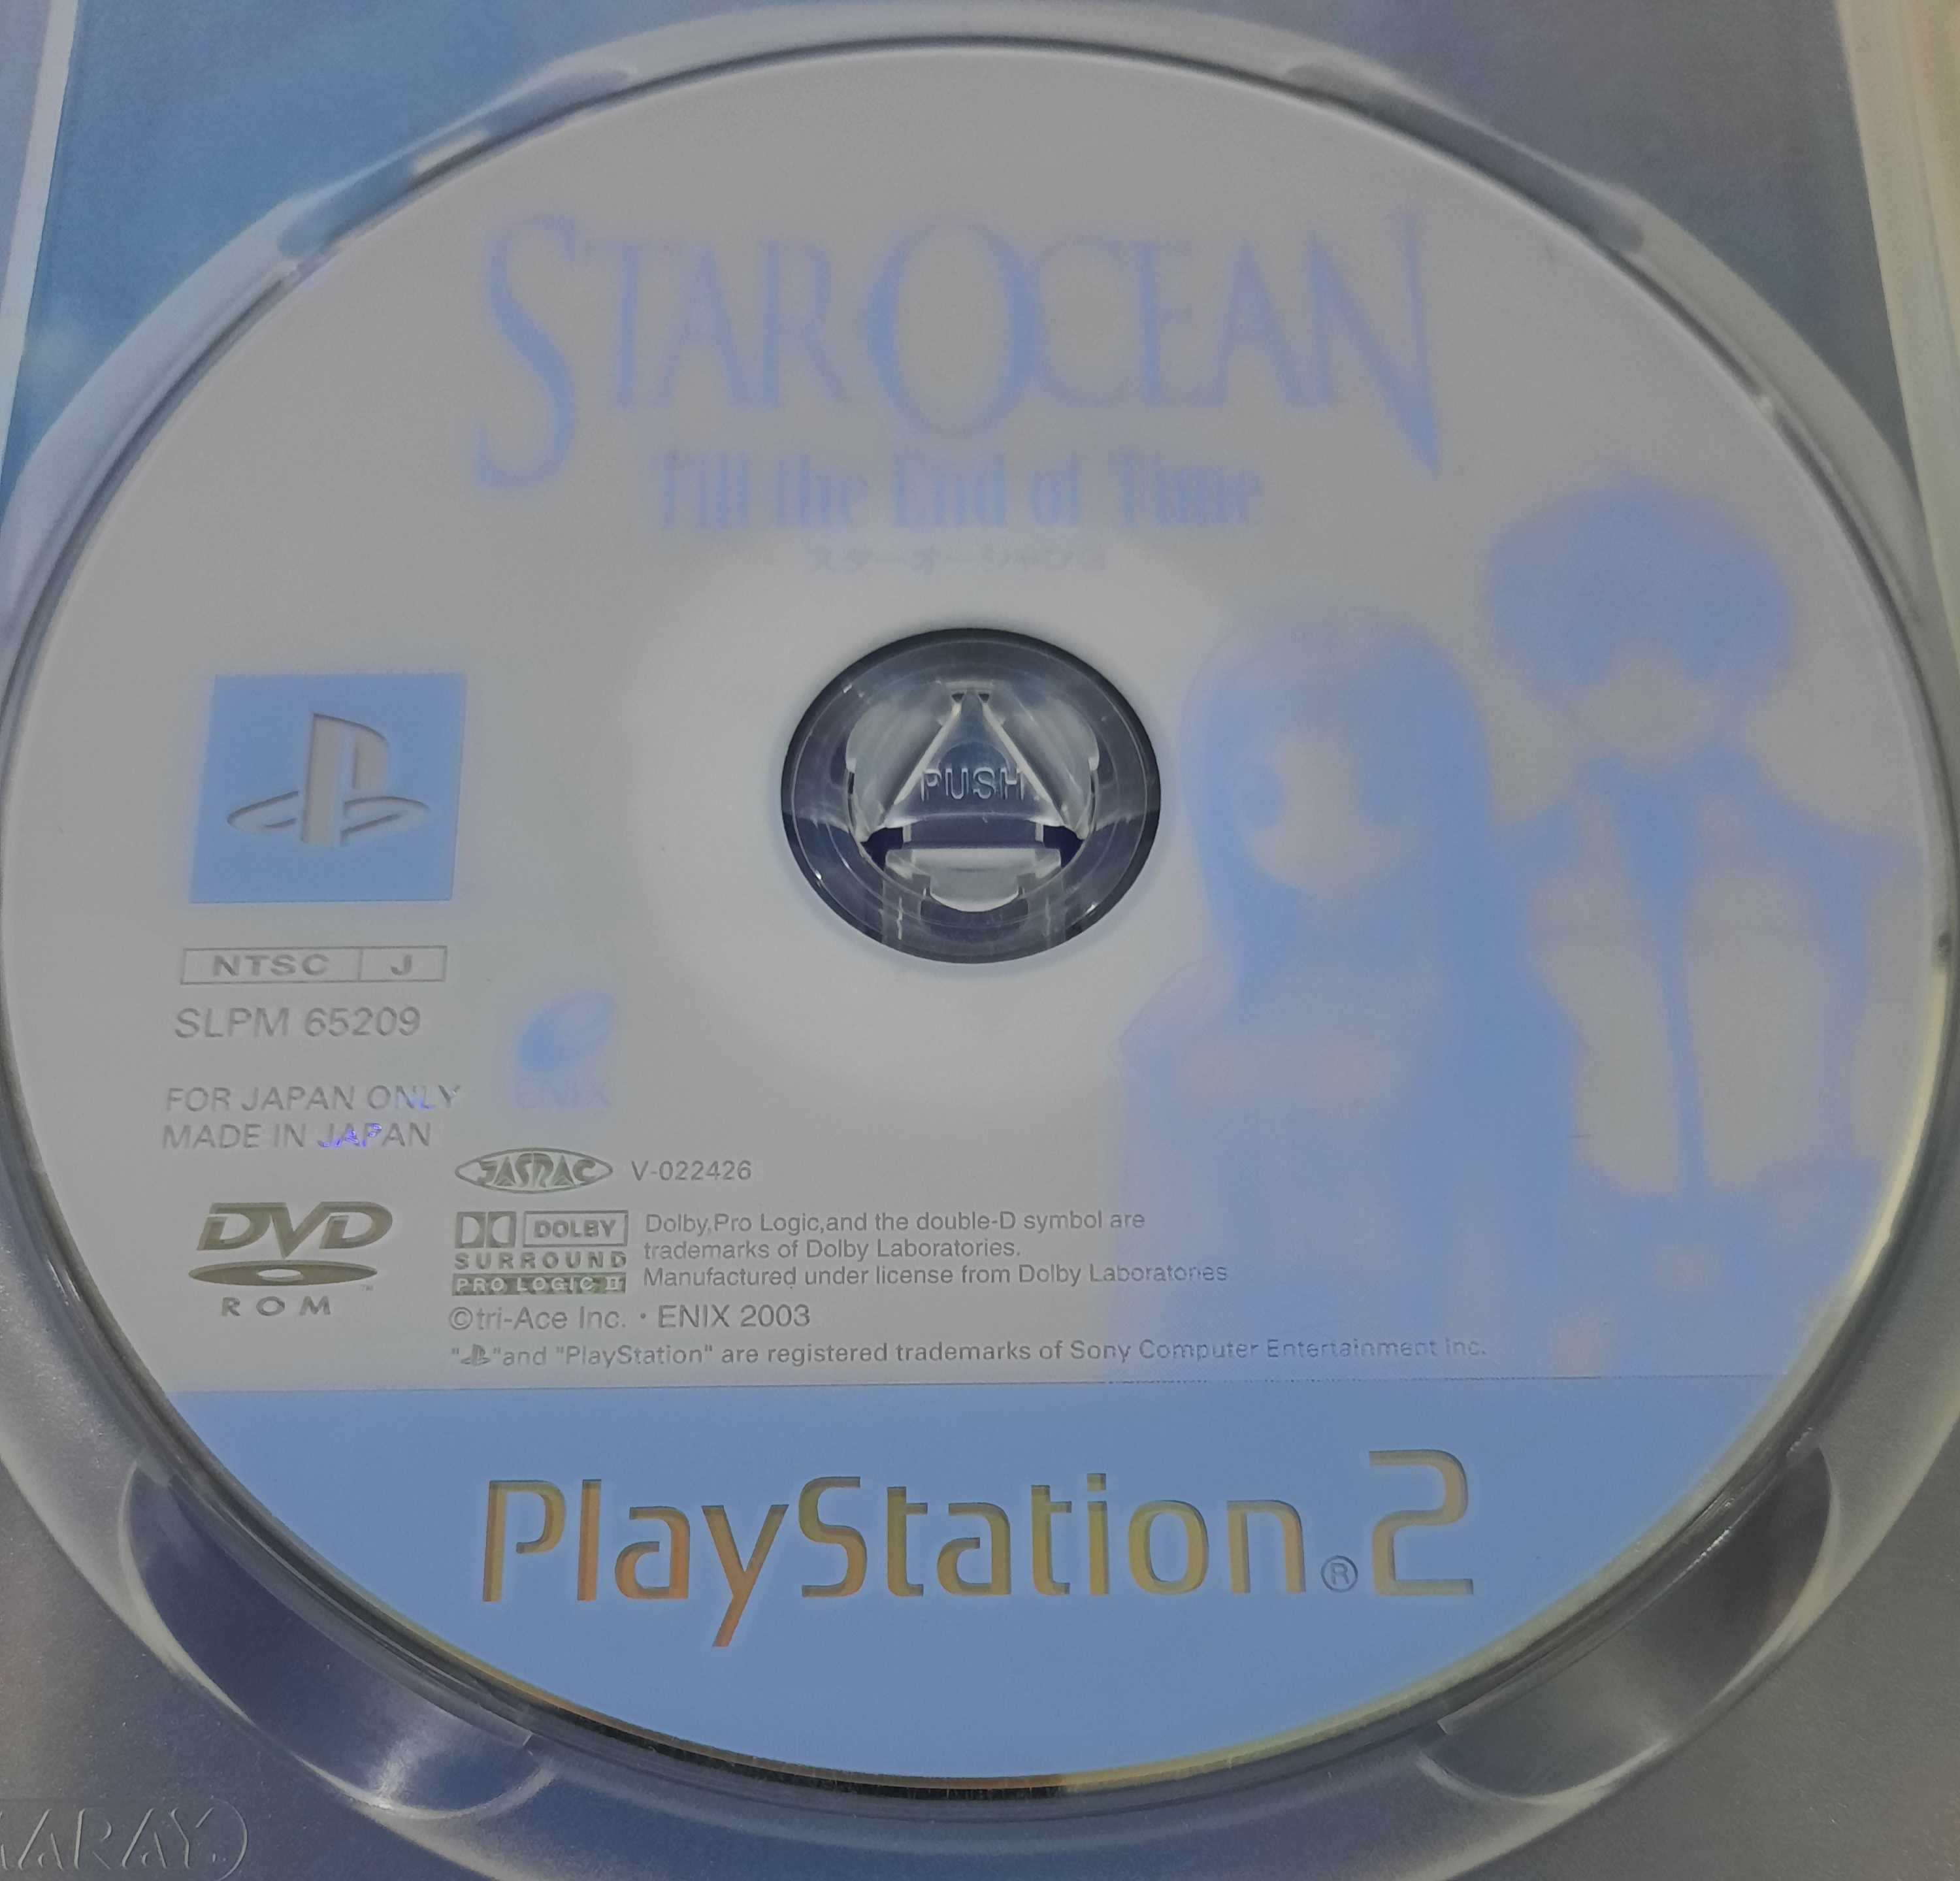 Star Ocean: Till the End of Time / PS2 [NTSC-J]